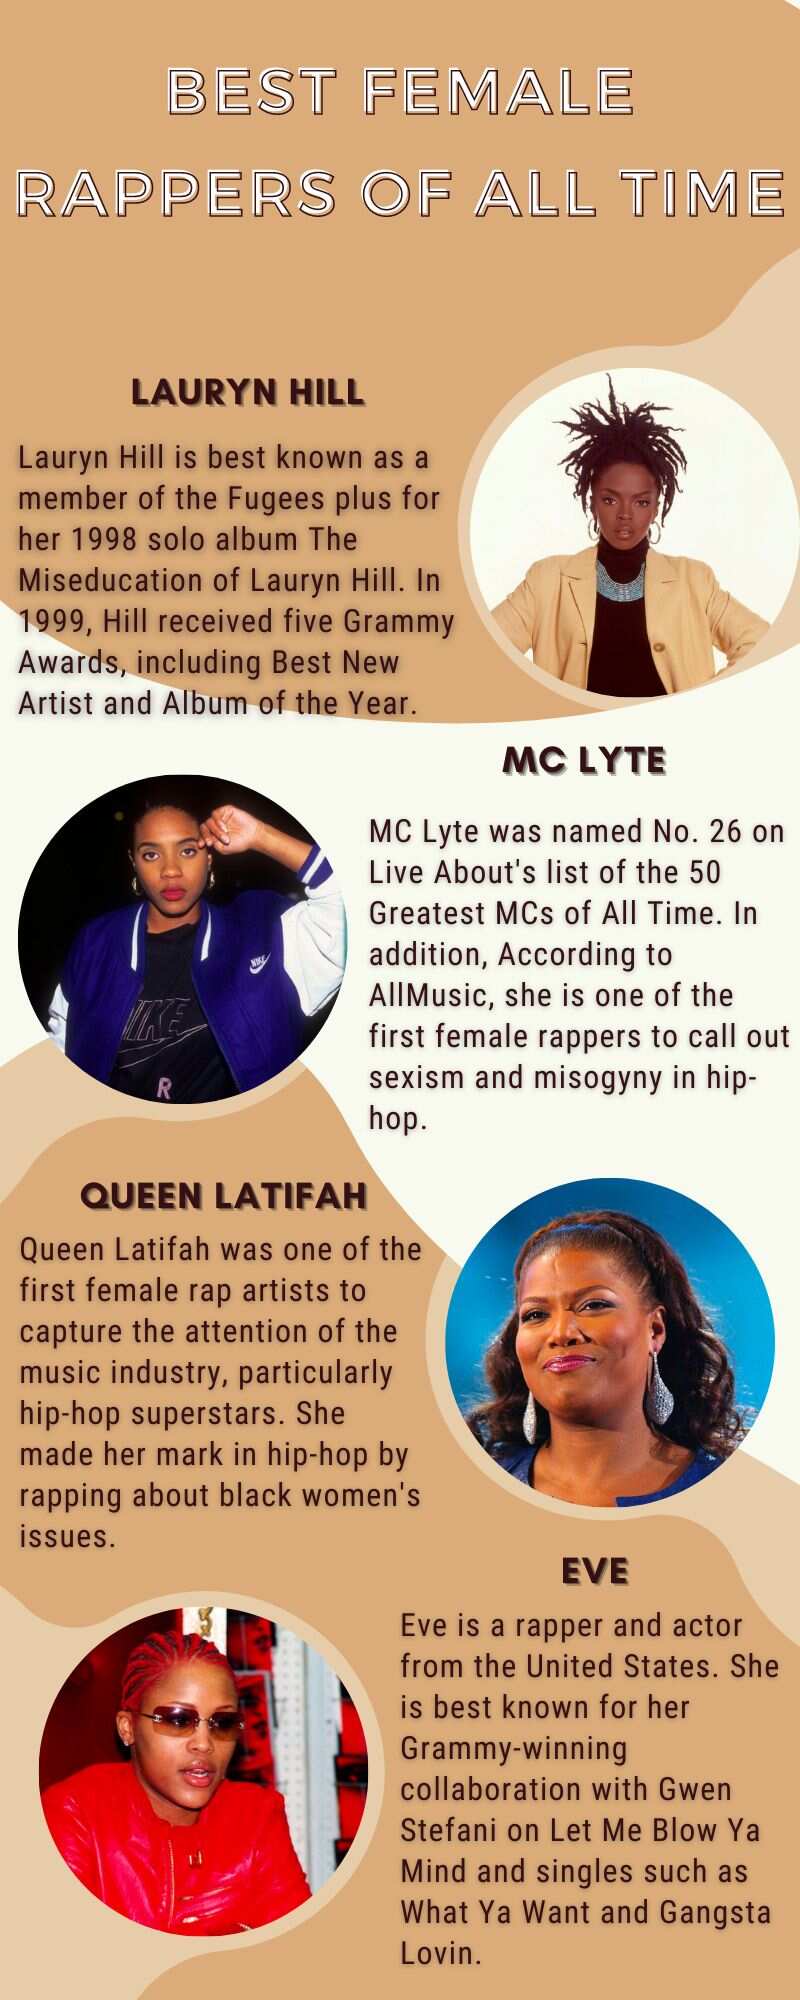 Best female rappers of all time